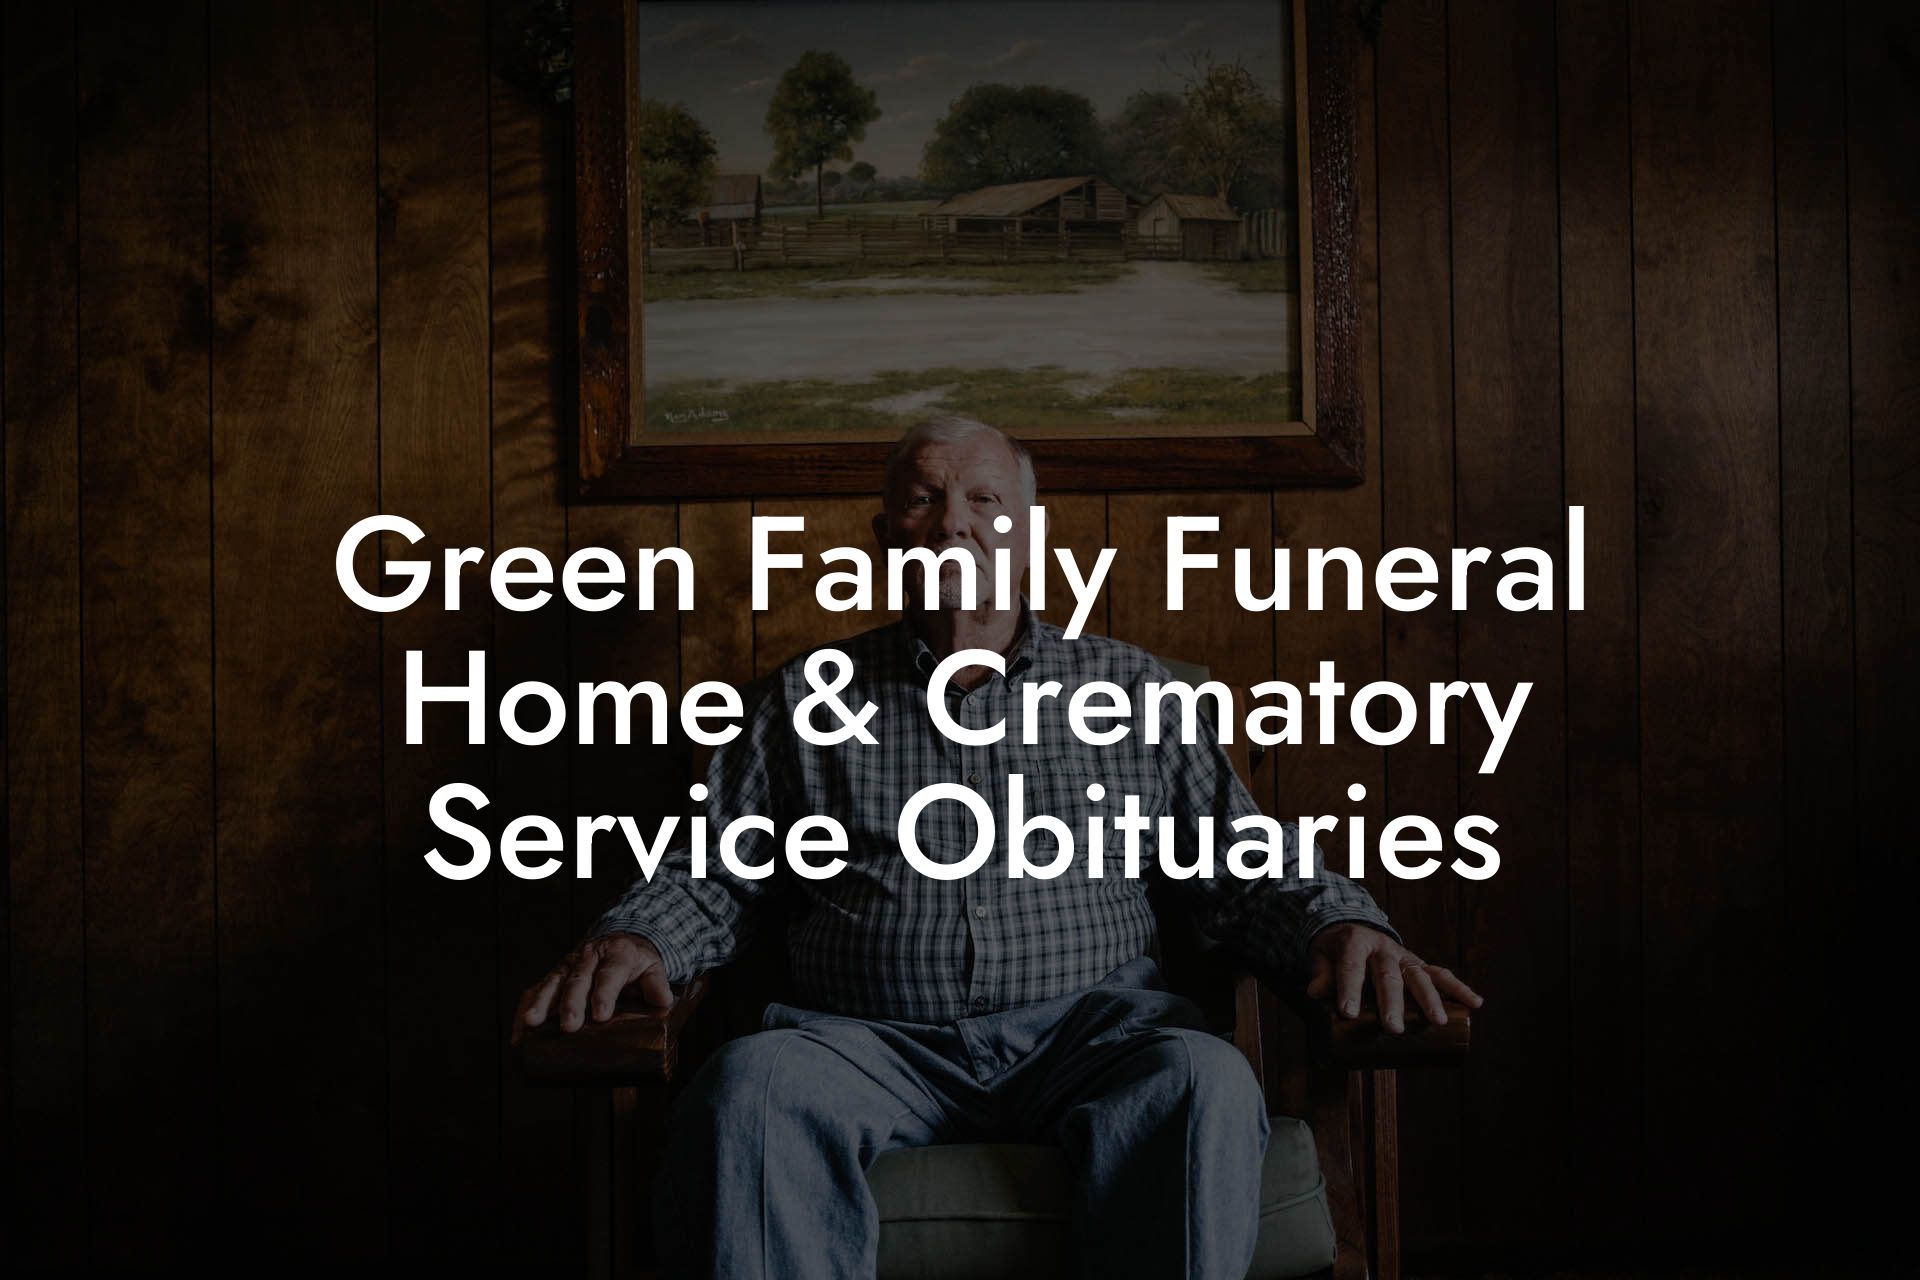 Green Family Funeral Home & Crematory Service Obituaries